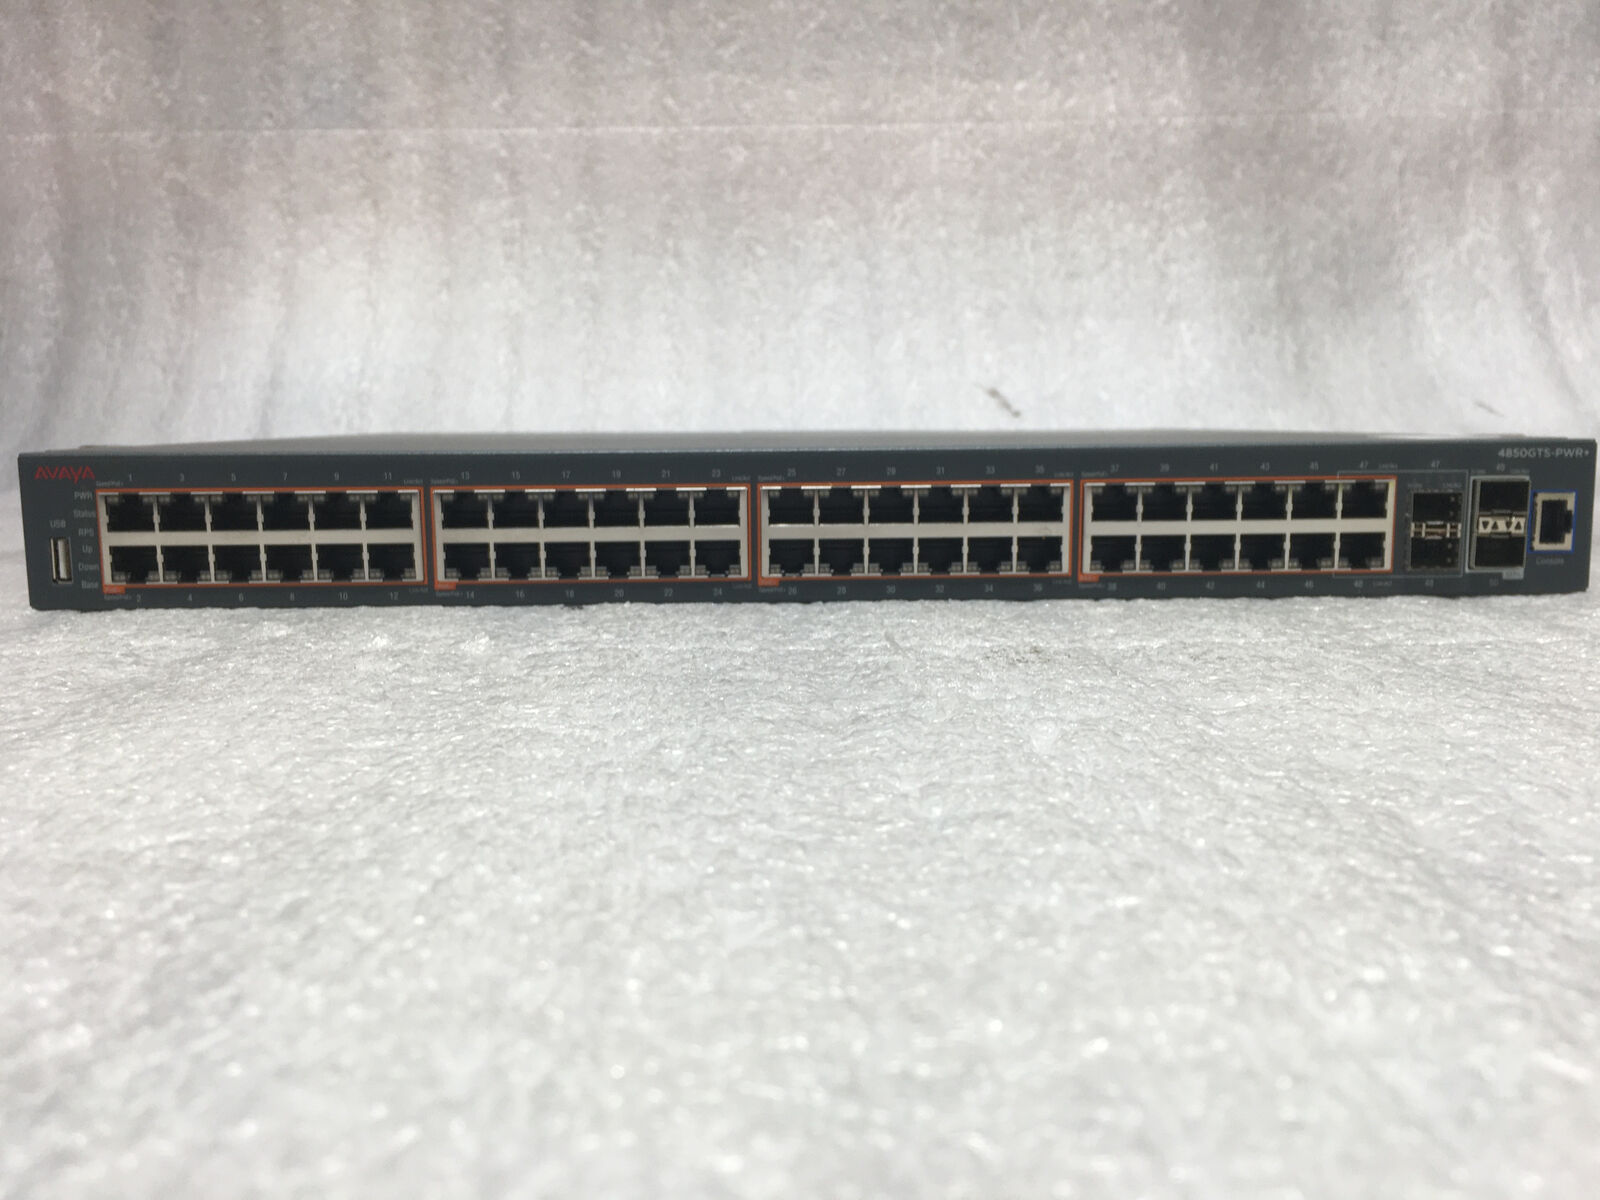 AVAYA 4850GTS-PWR+ 48 Port Rackmount Network Switch Factory Reset No Power Cable